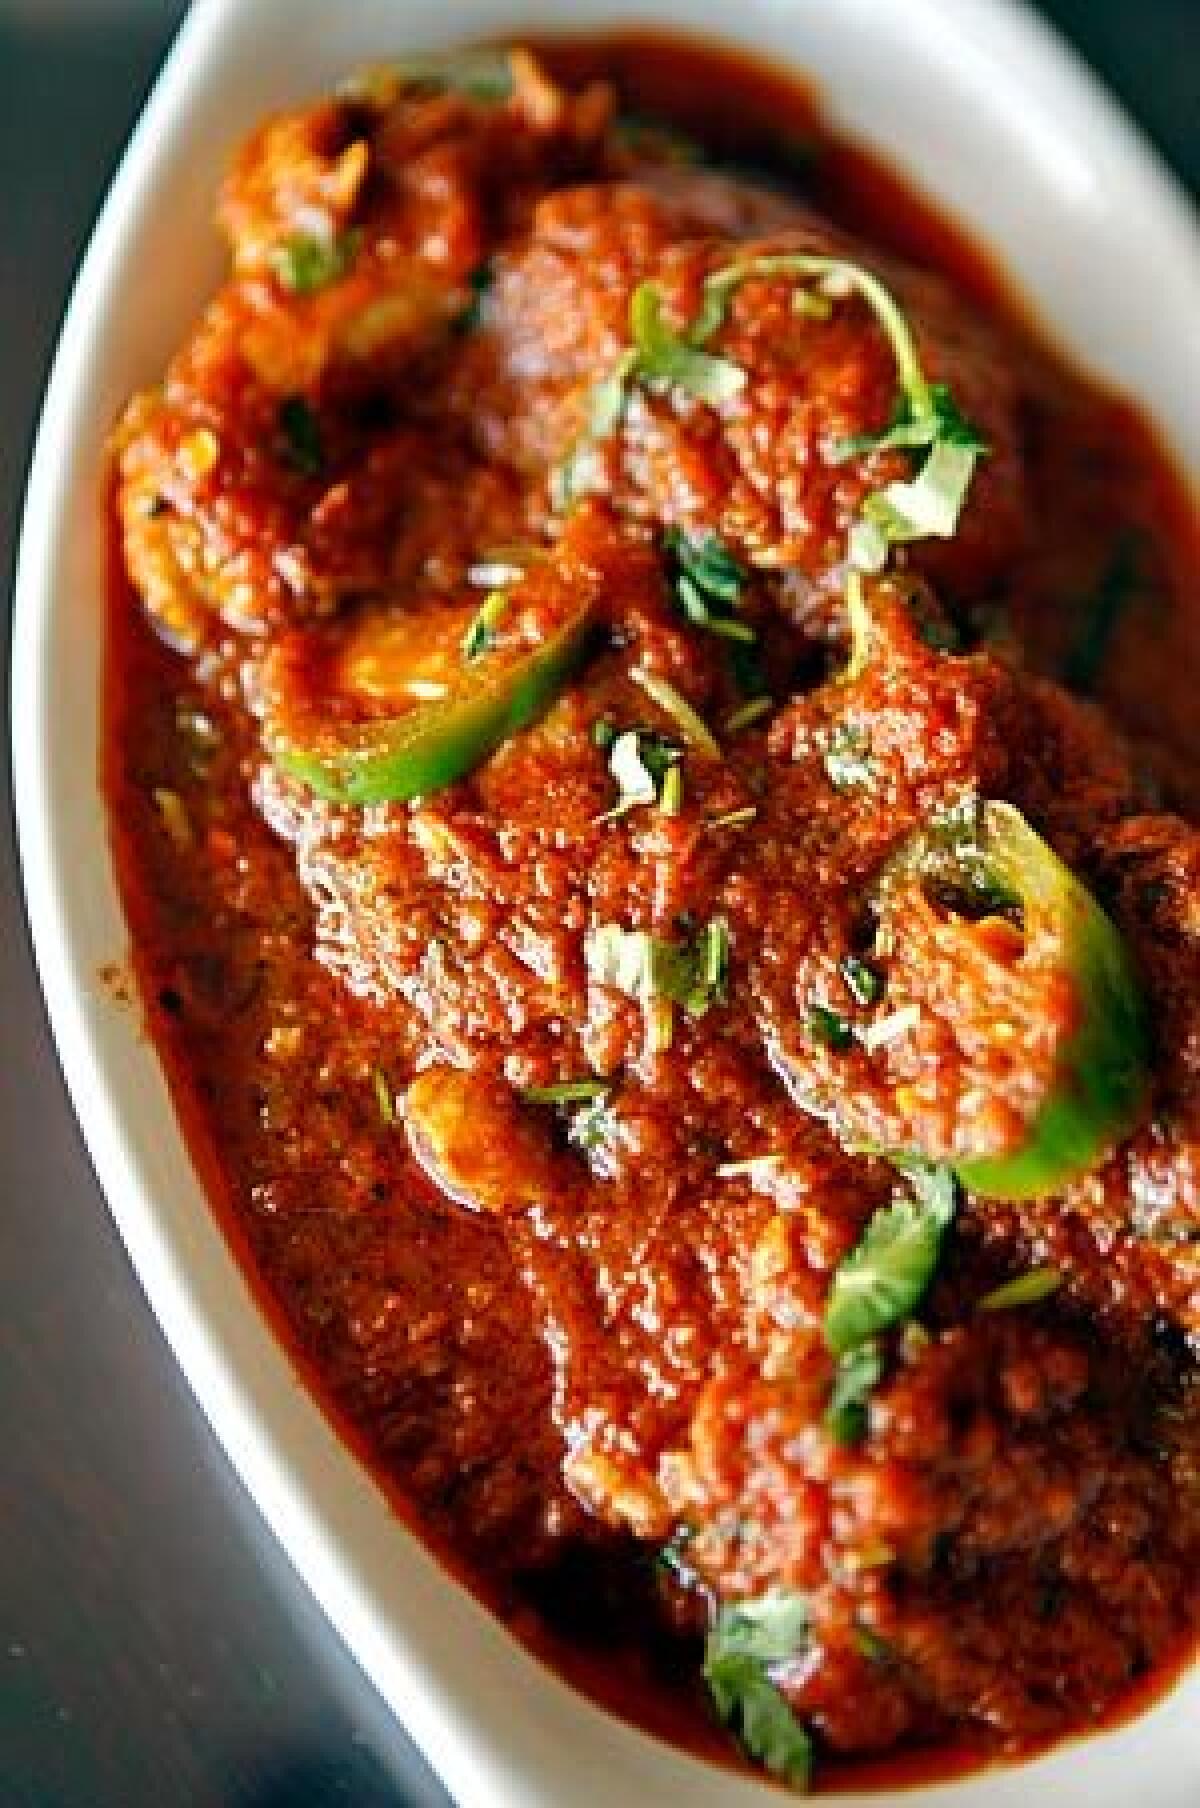 Chicken Karahi -- a mild curry dish with cooked tomatoes -- is on the menu at Red Chili.